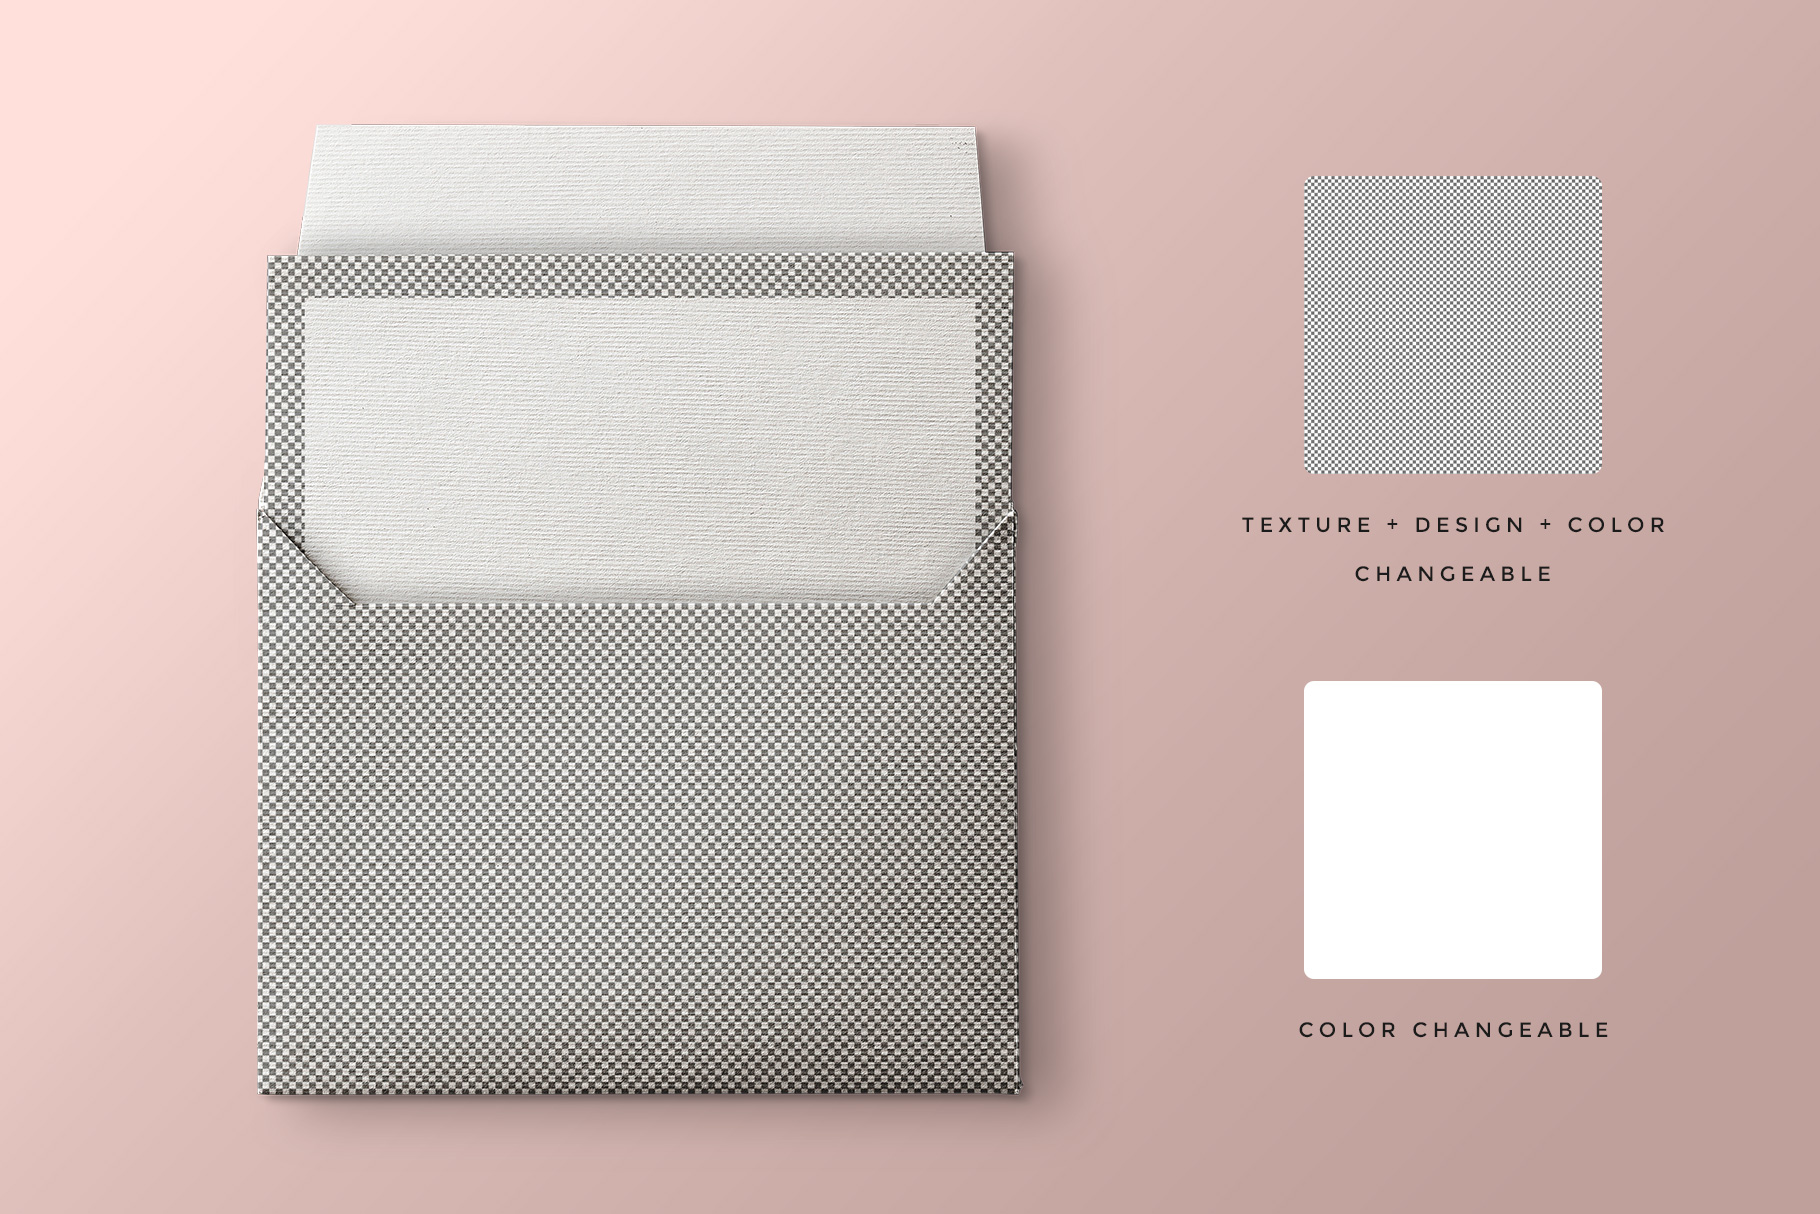 Top View Open Envelope With Card Mockup